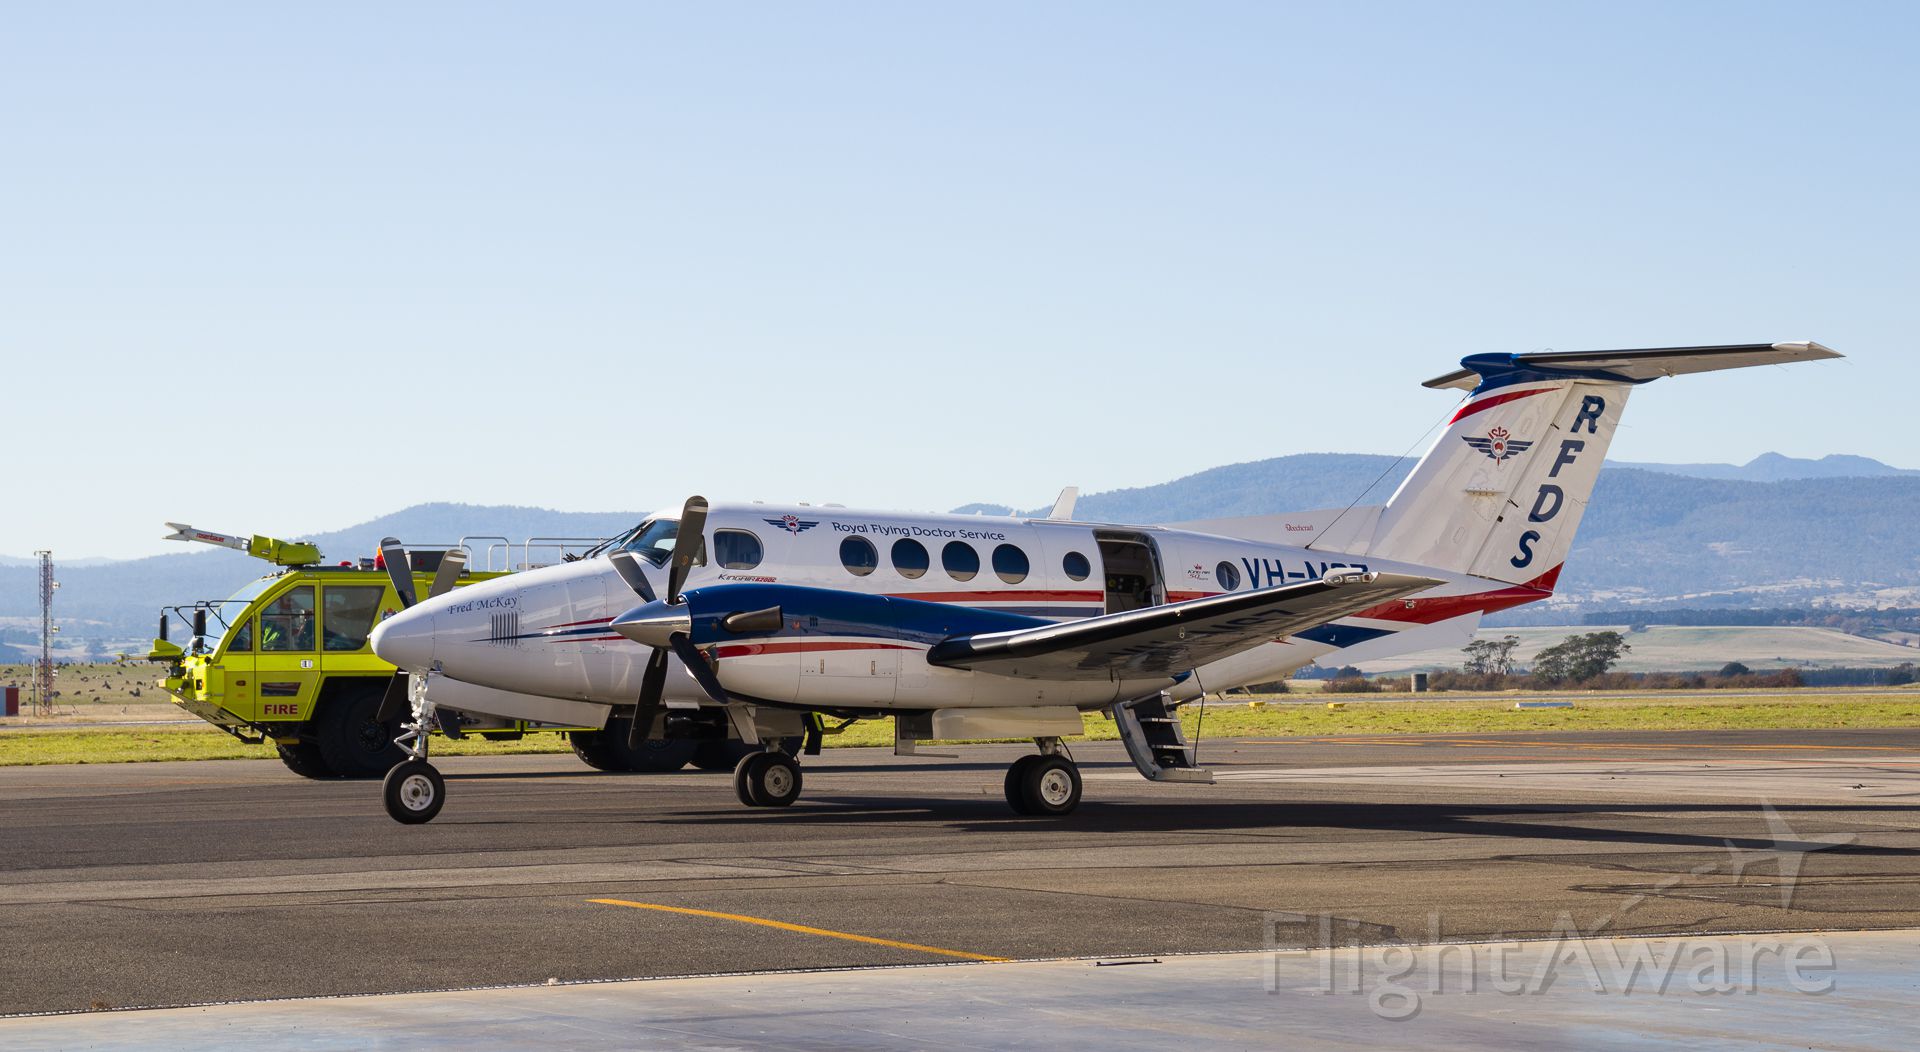 Beechcraft Super King Air 200 (VH-MSZ) - Royal Flying Doctors Beechcraft King Air 200B preparing for a departure out of Launceston